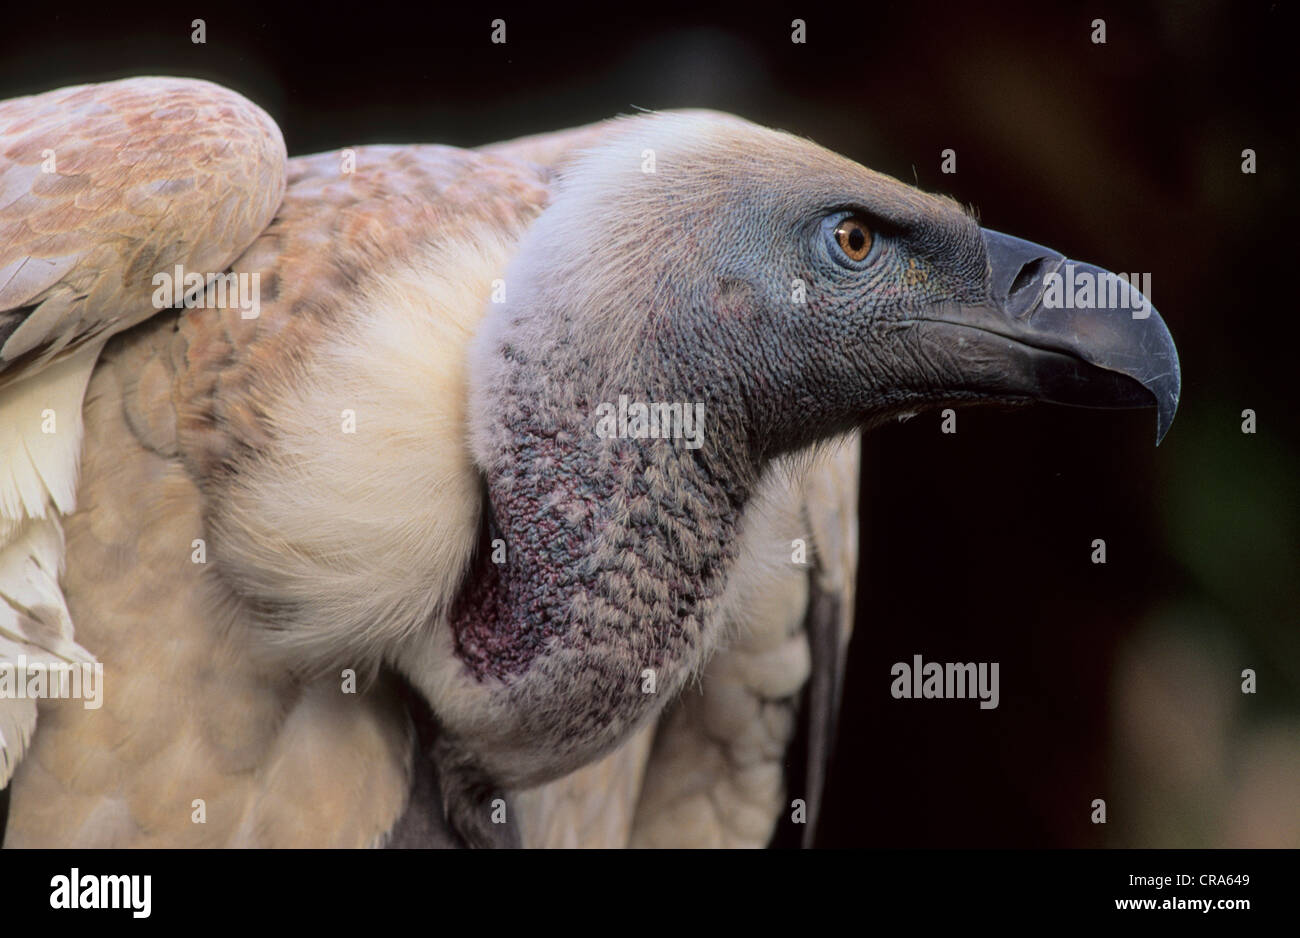 Cape Vulture (Gyps coprotheres), endangered species, KwaZulu-Natal, South Africa, Africa Stock Photo